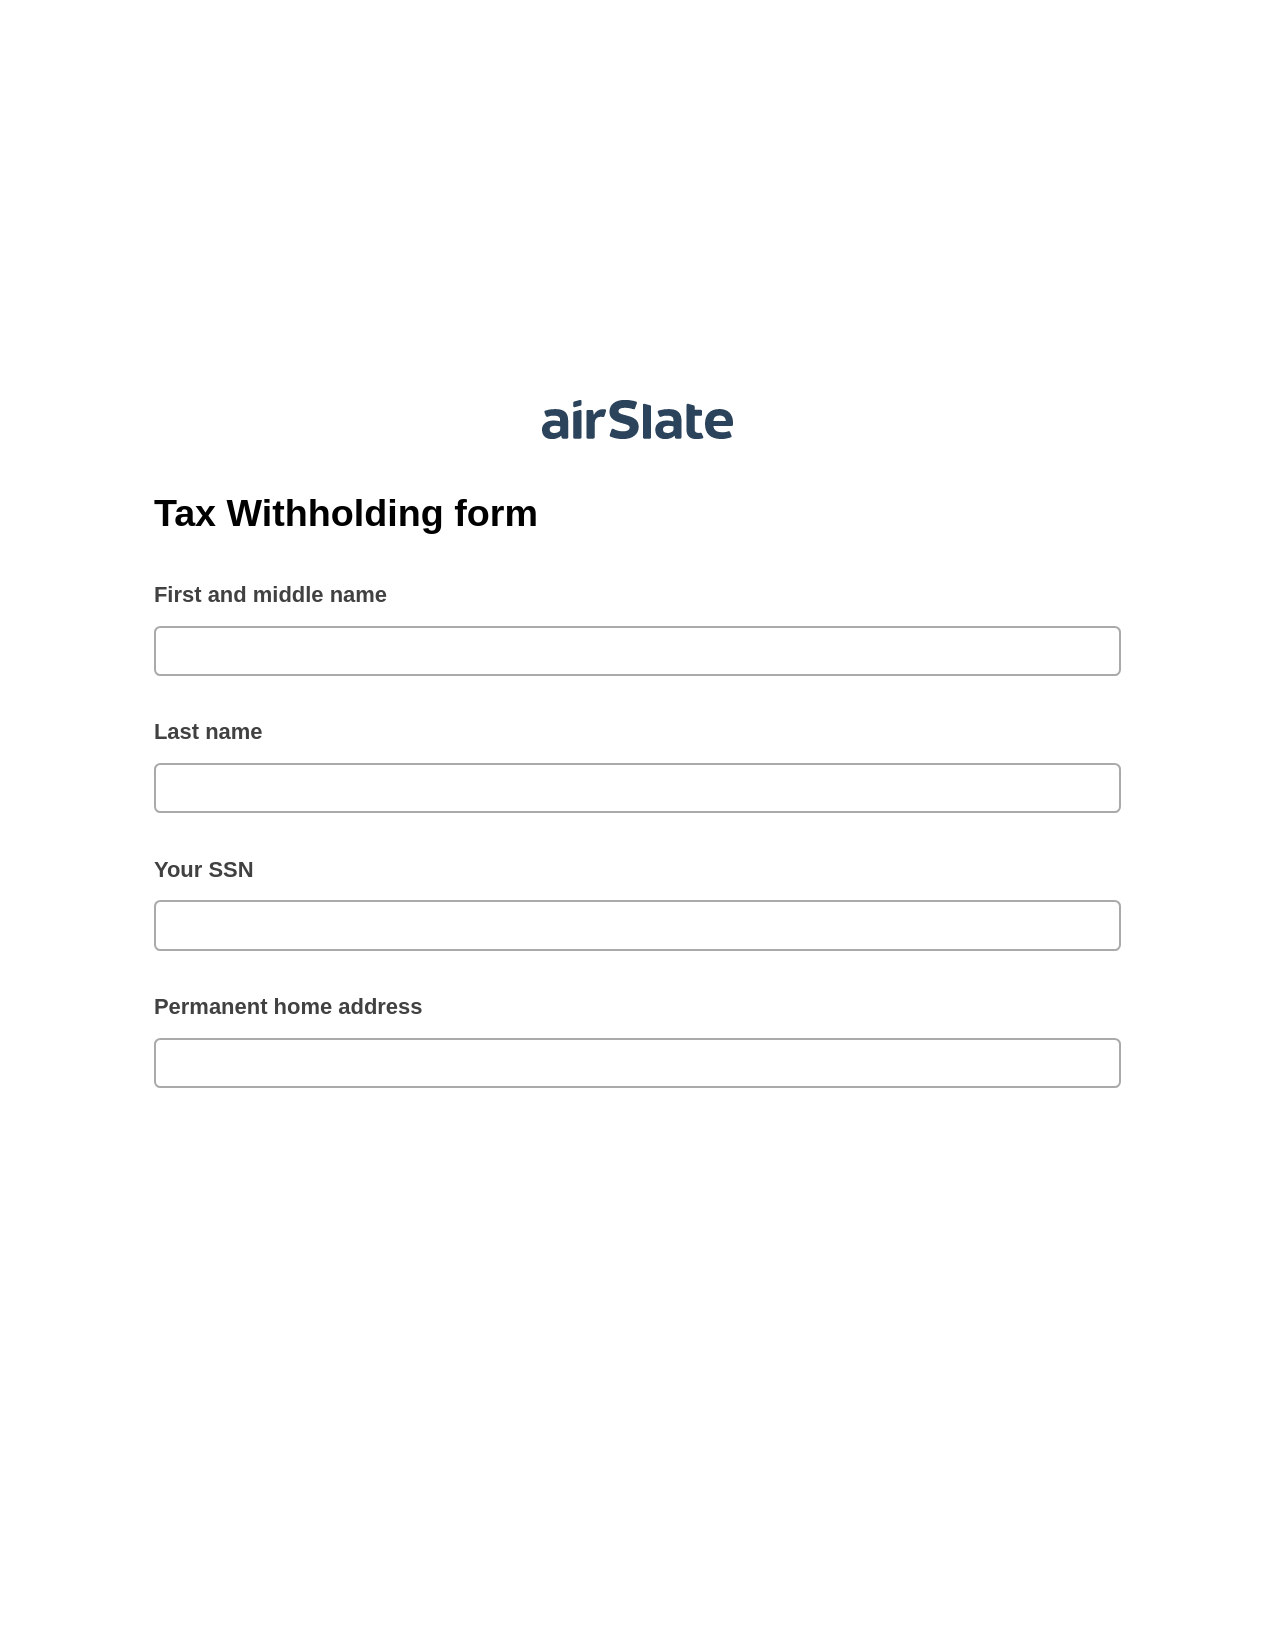 Multirole Tax Withholding form Pre-fill Dropdowns from CSV File Bot, Unassign Role Bot, Email Notification Postfinish Bot